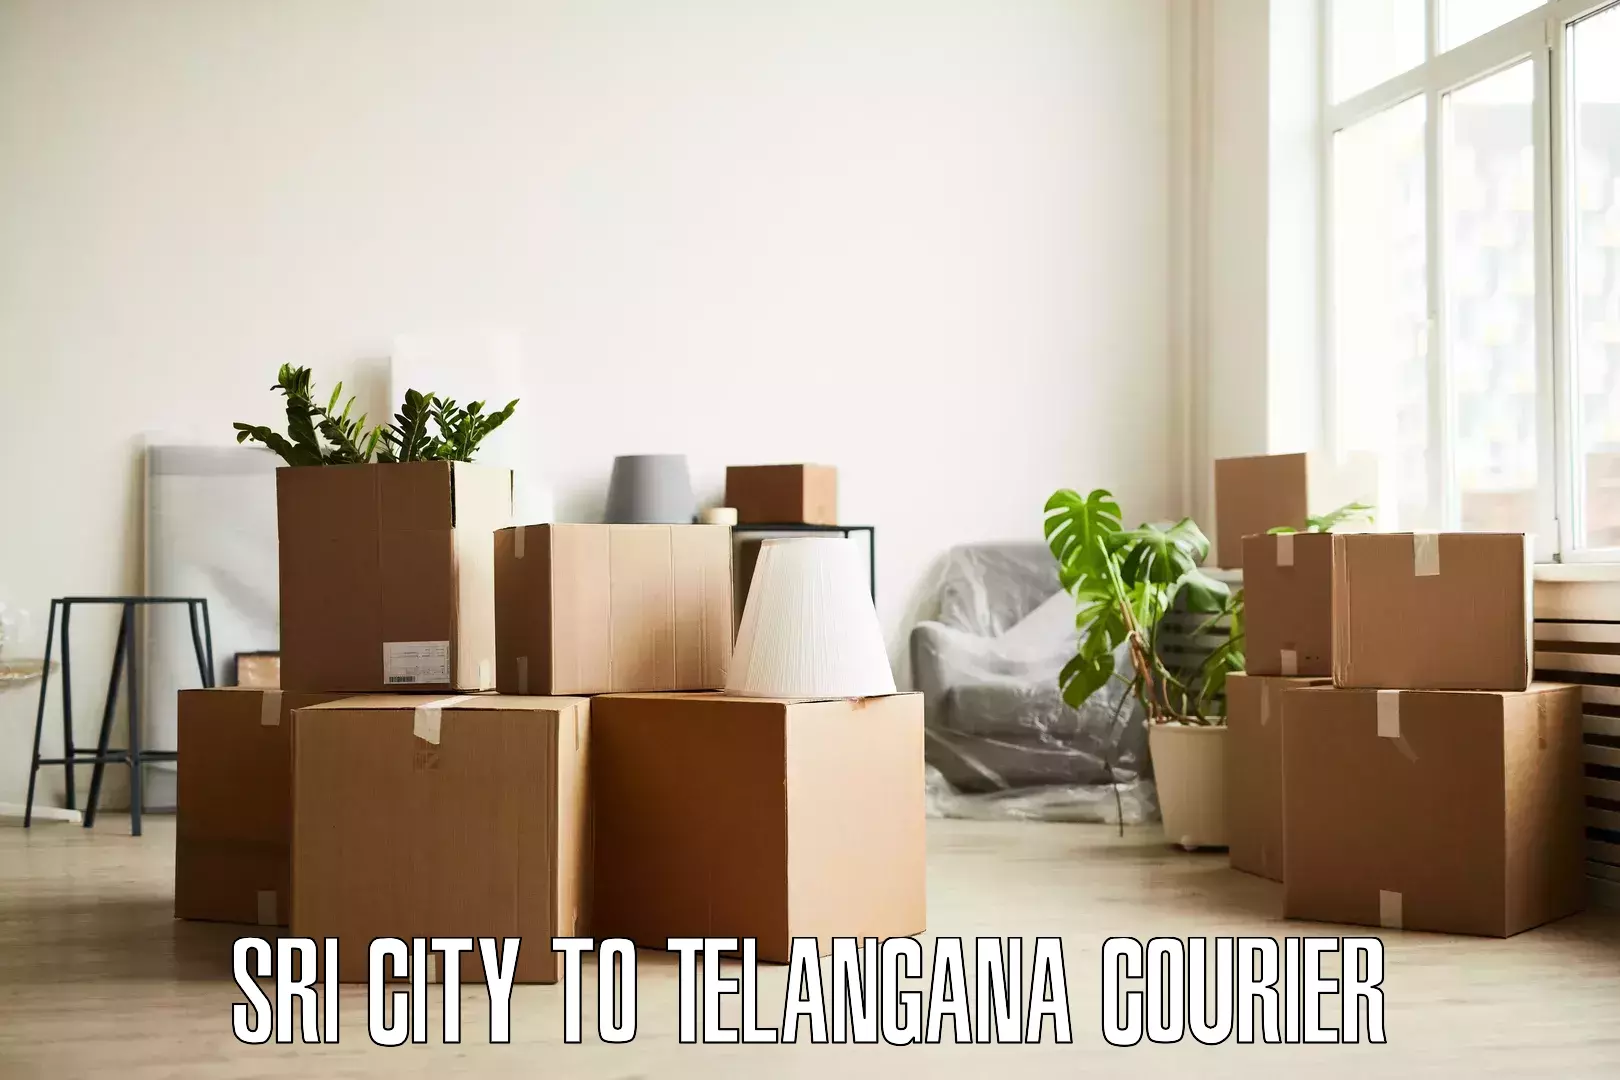 Furniture transport and logistics in Sri City to University of Hyderabad